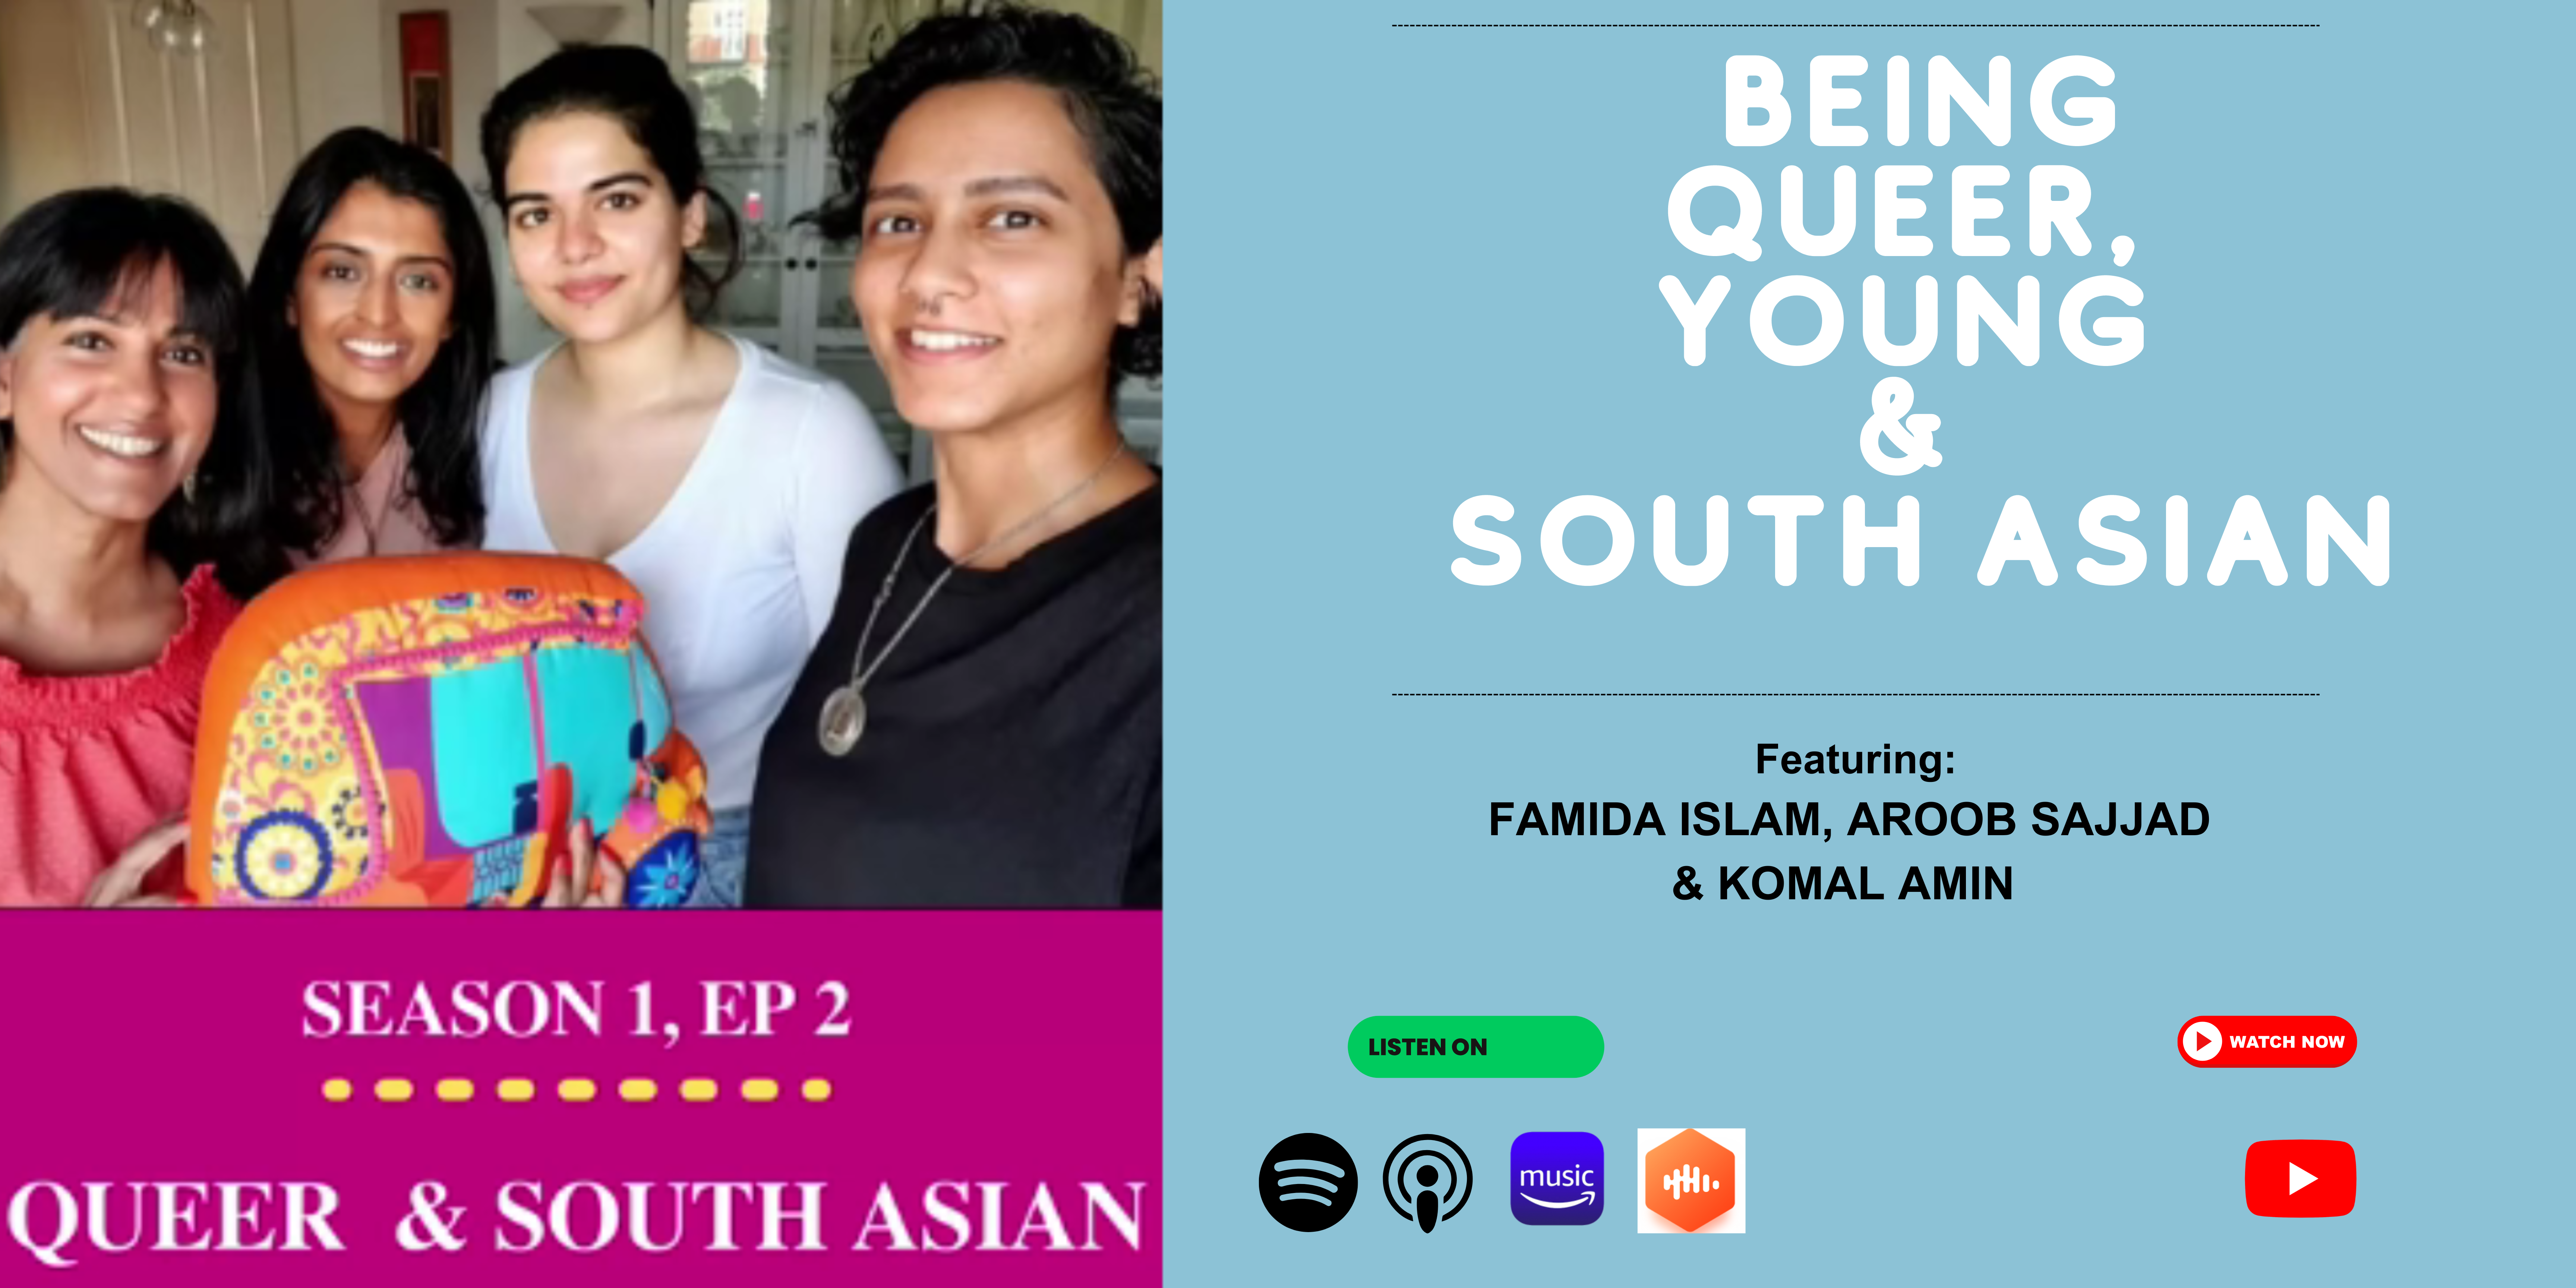 Masala Podcast interviews three incredible young people who identify as queer and South Asian.